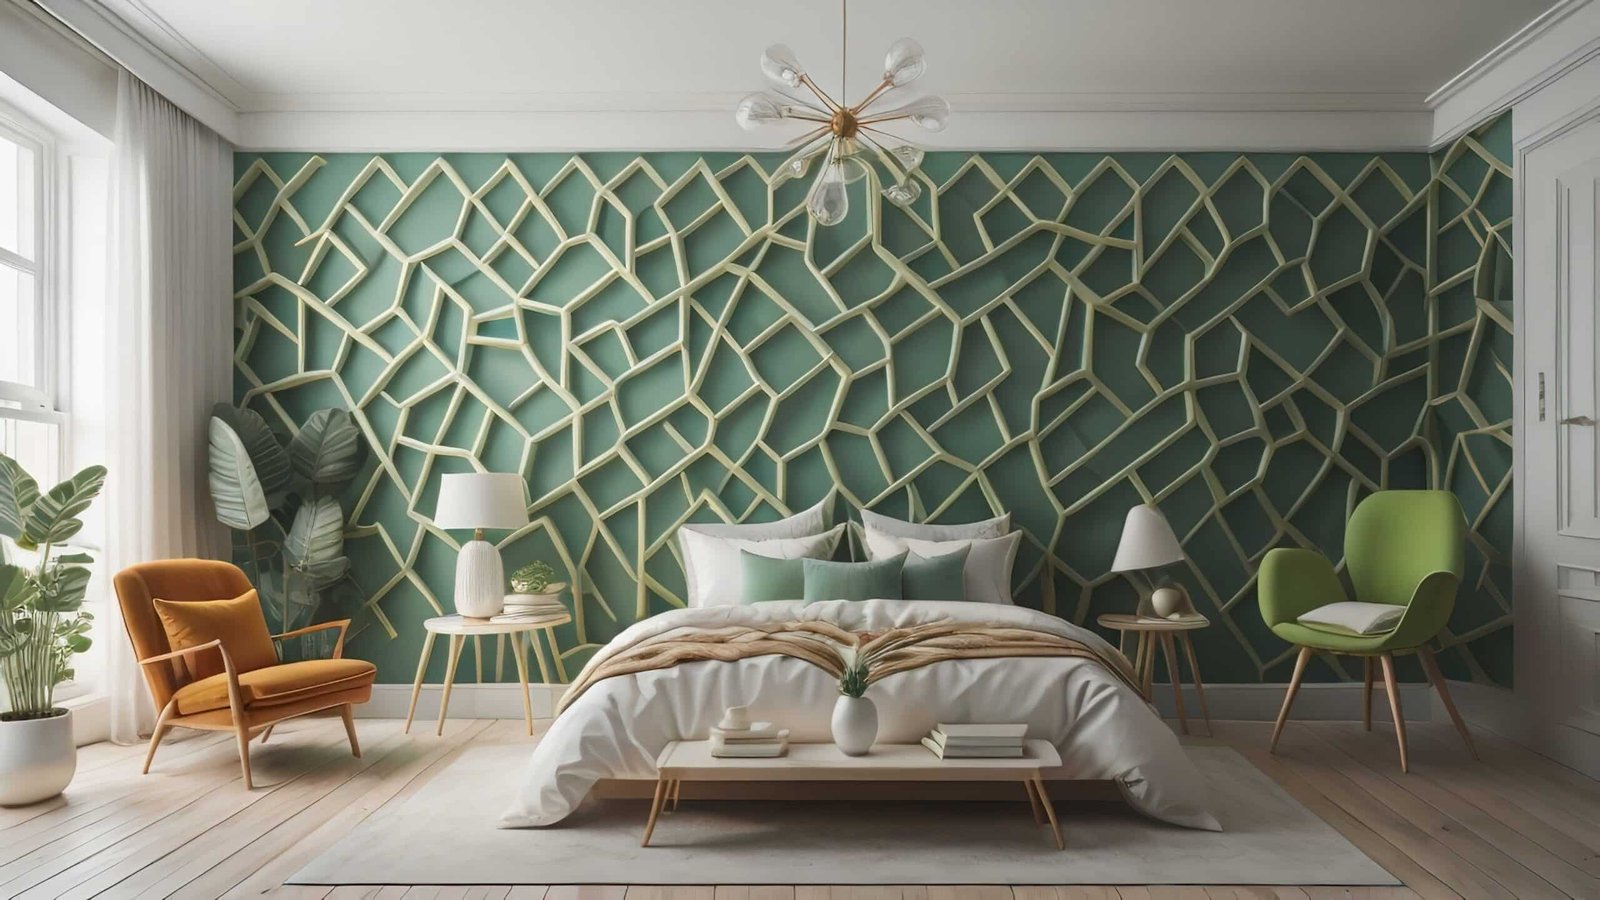 Interior Of Modern Bedroom With Sage Green Tile Wall